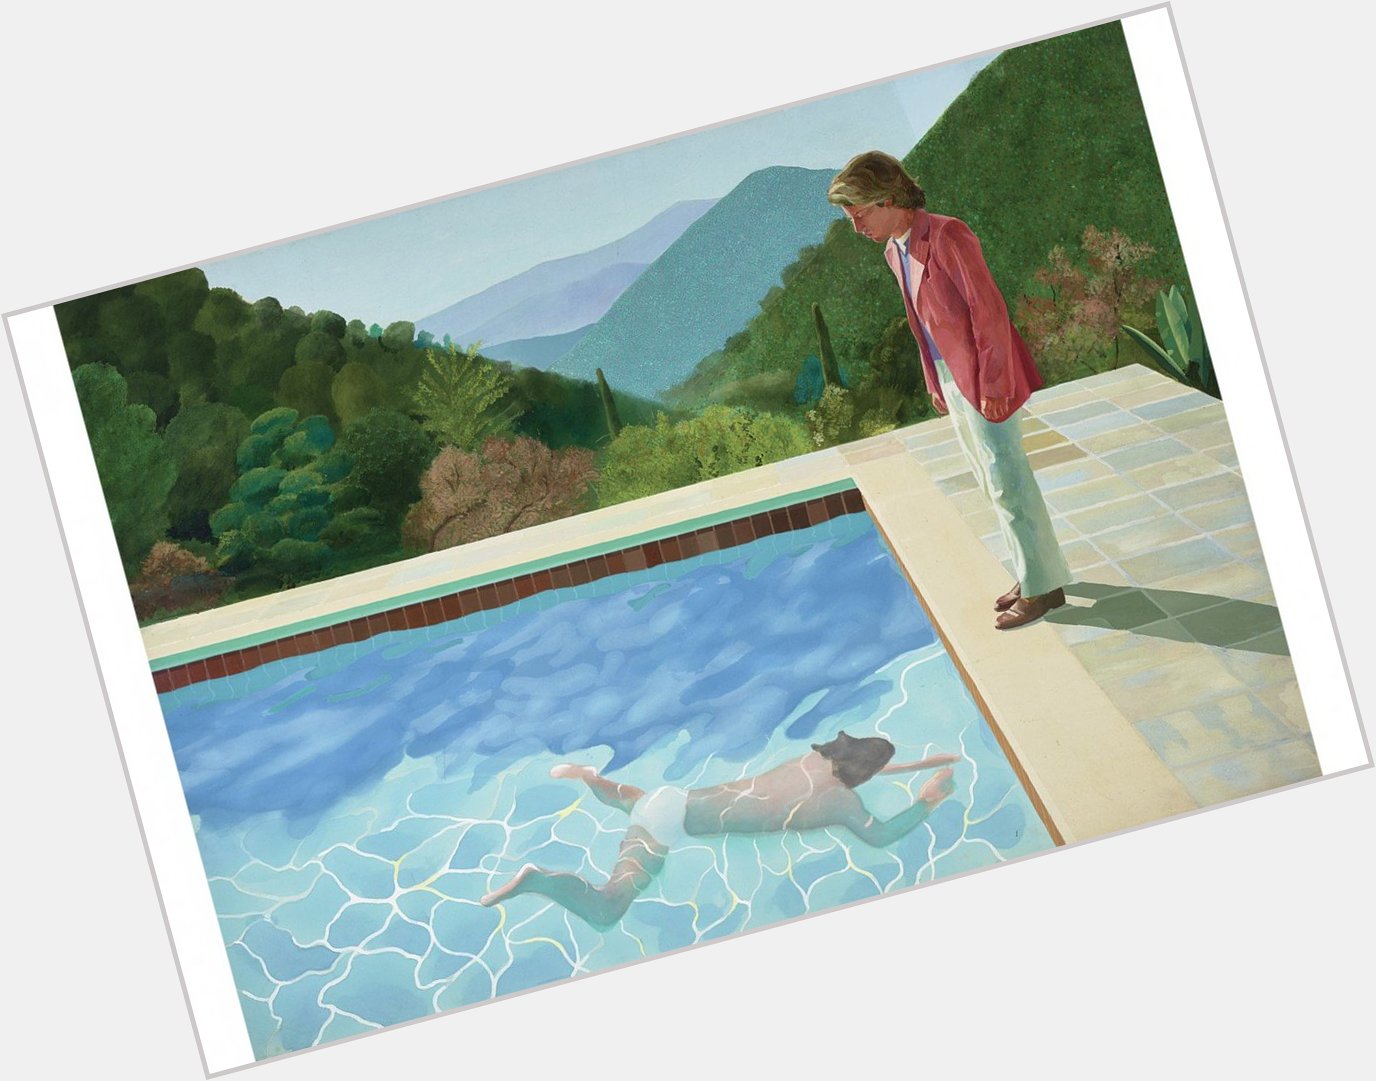 Happy birthday to David Hockney! spoke with the artist at in 2009:  